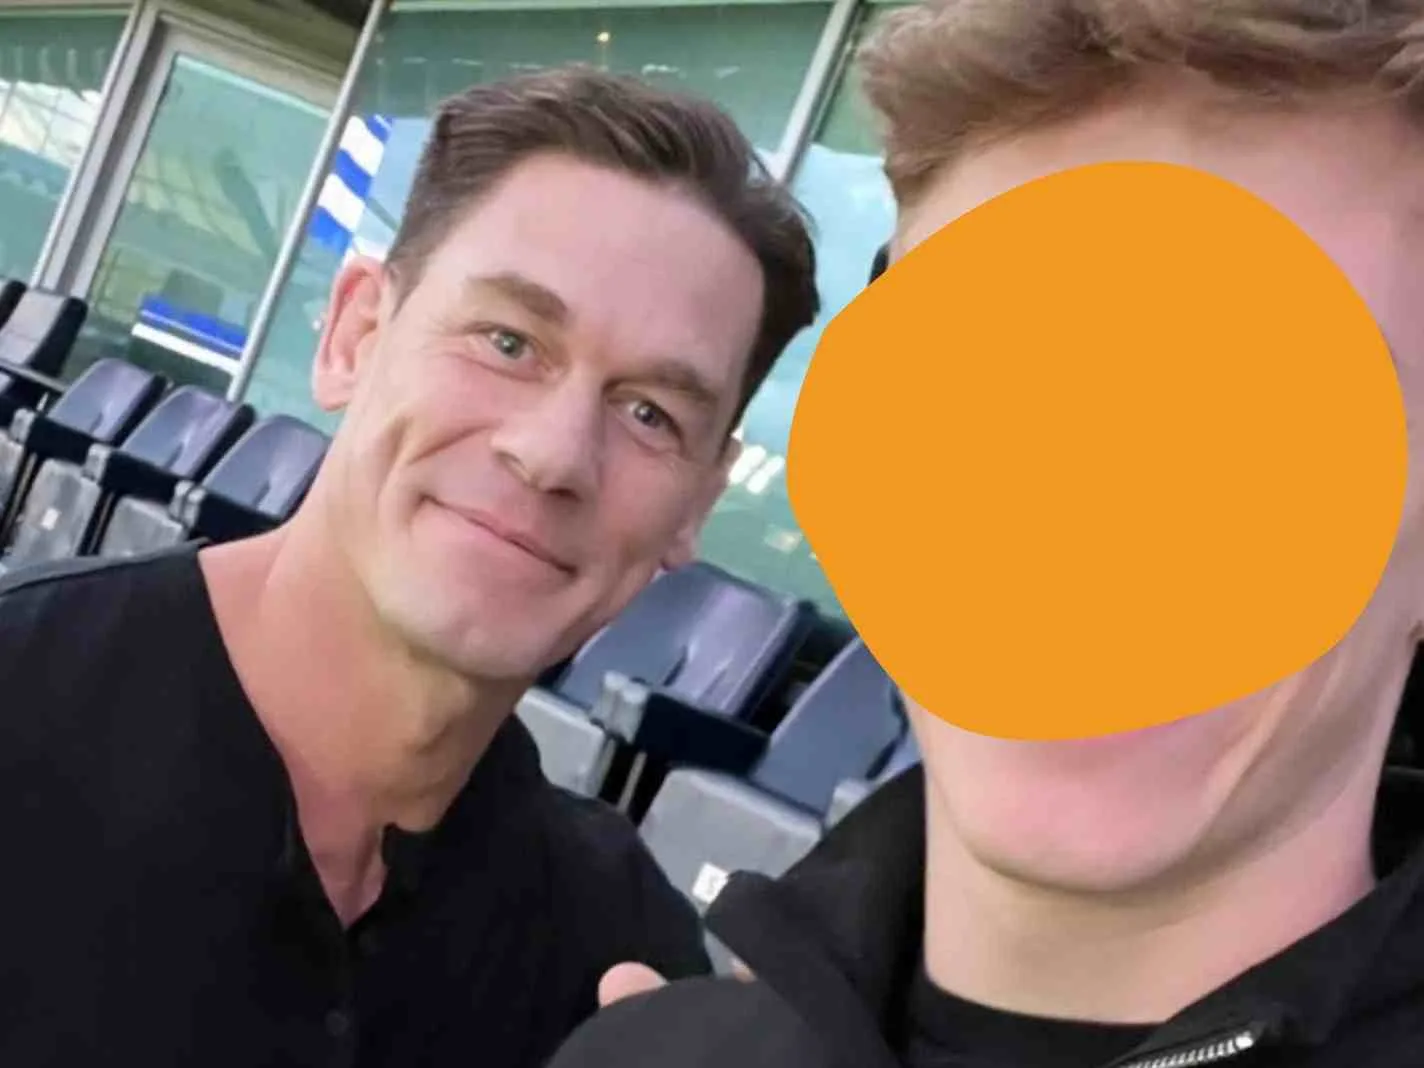 The photo shows John Cena at Stamford Bridge along with a fan.